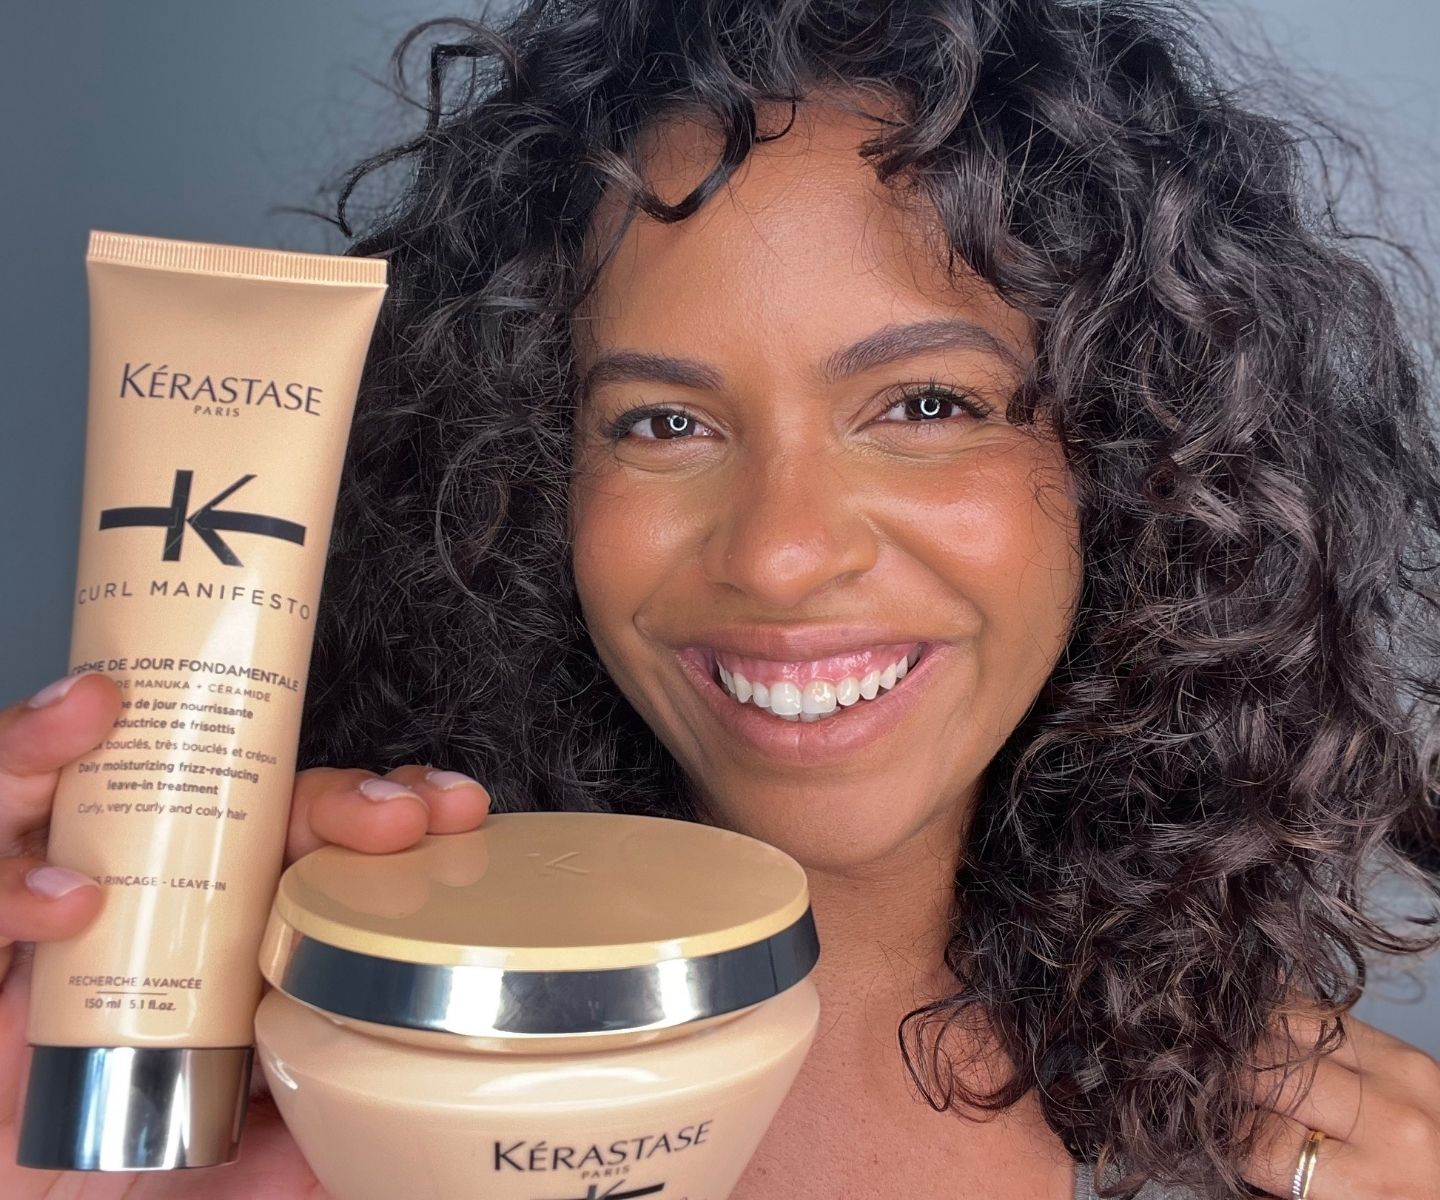 I Tried These New Curl Manifesto Products on My Curly, Frizz-Prone Hair